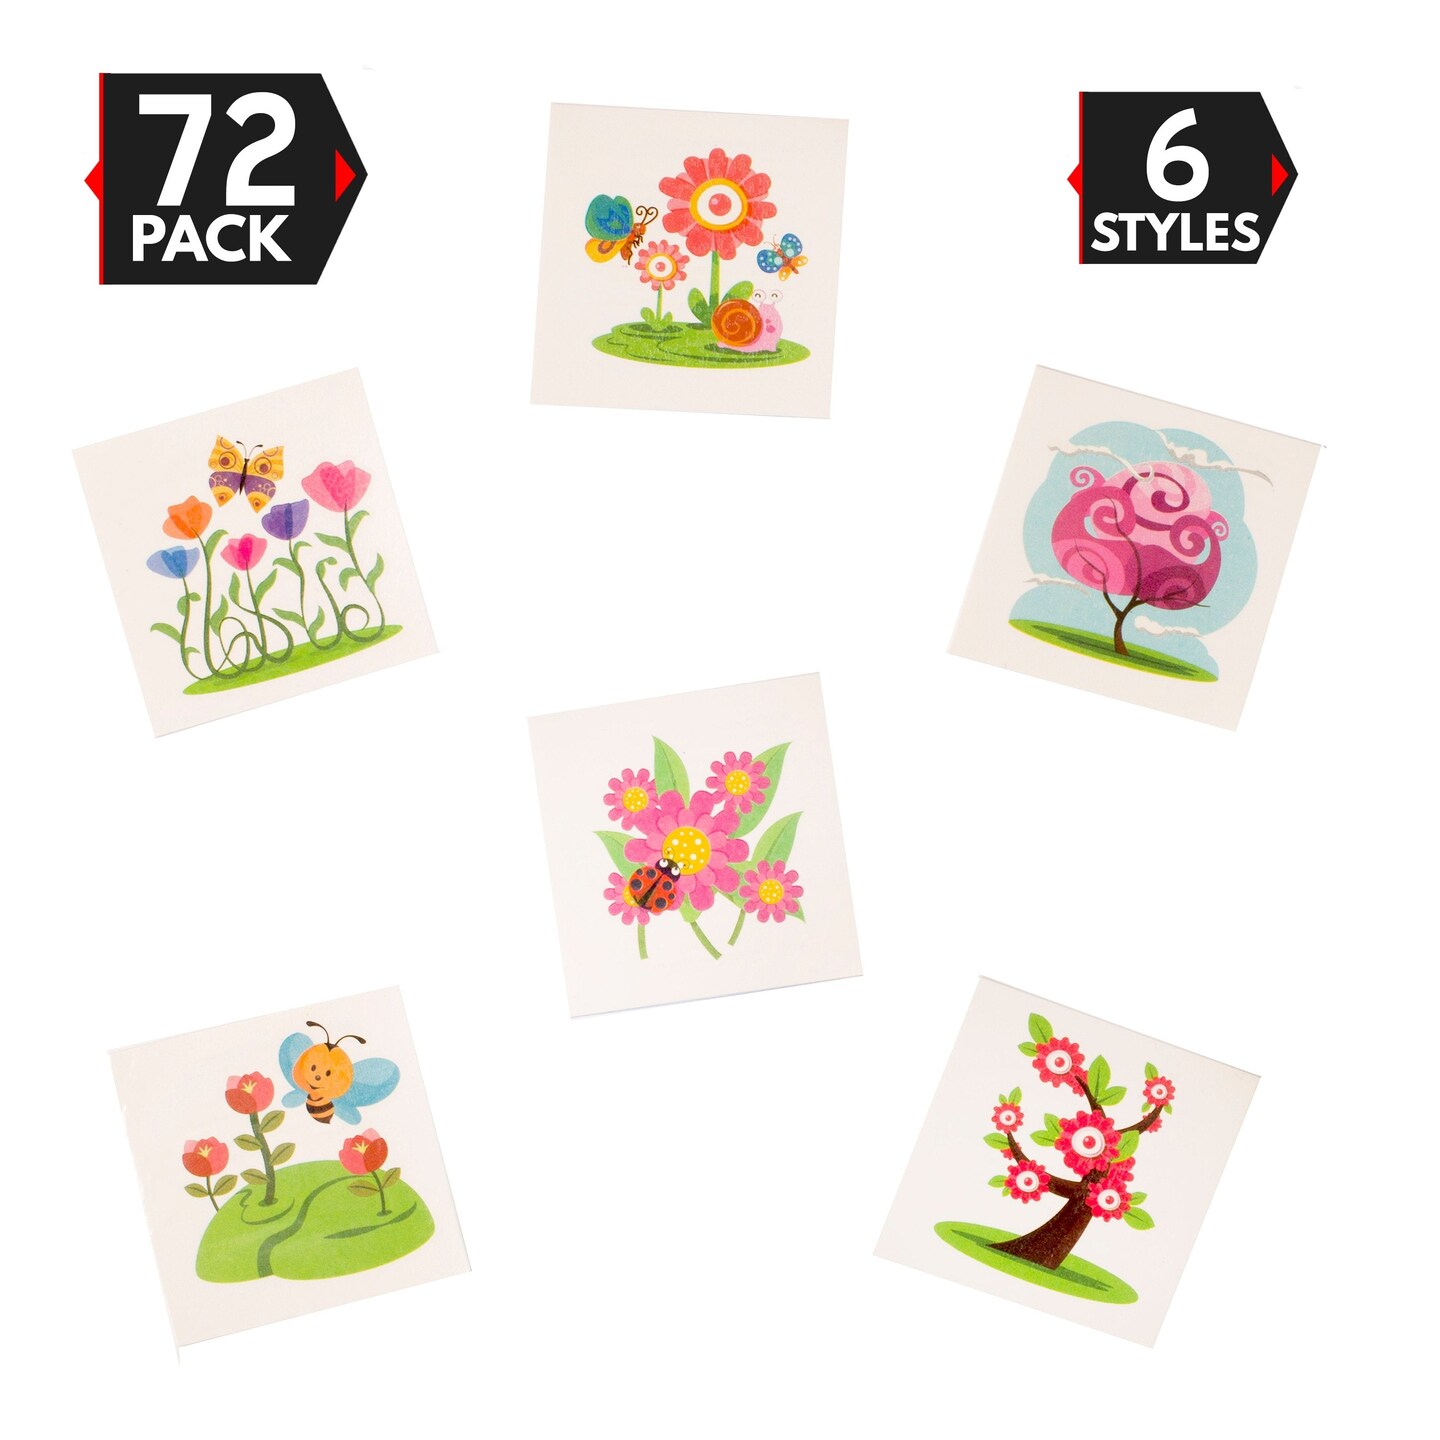 Big Mos Toys 72 Pack Spring and Summer Assorted Design Temporary Tattoos